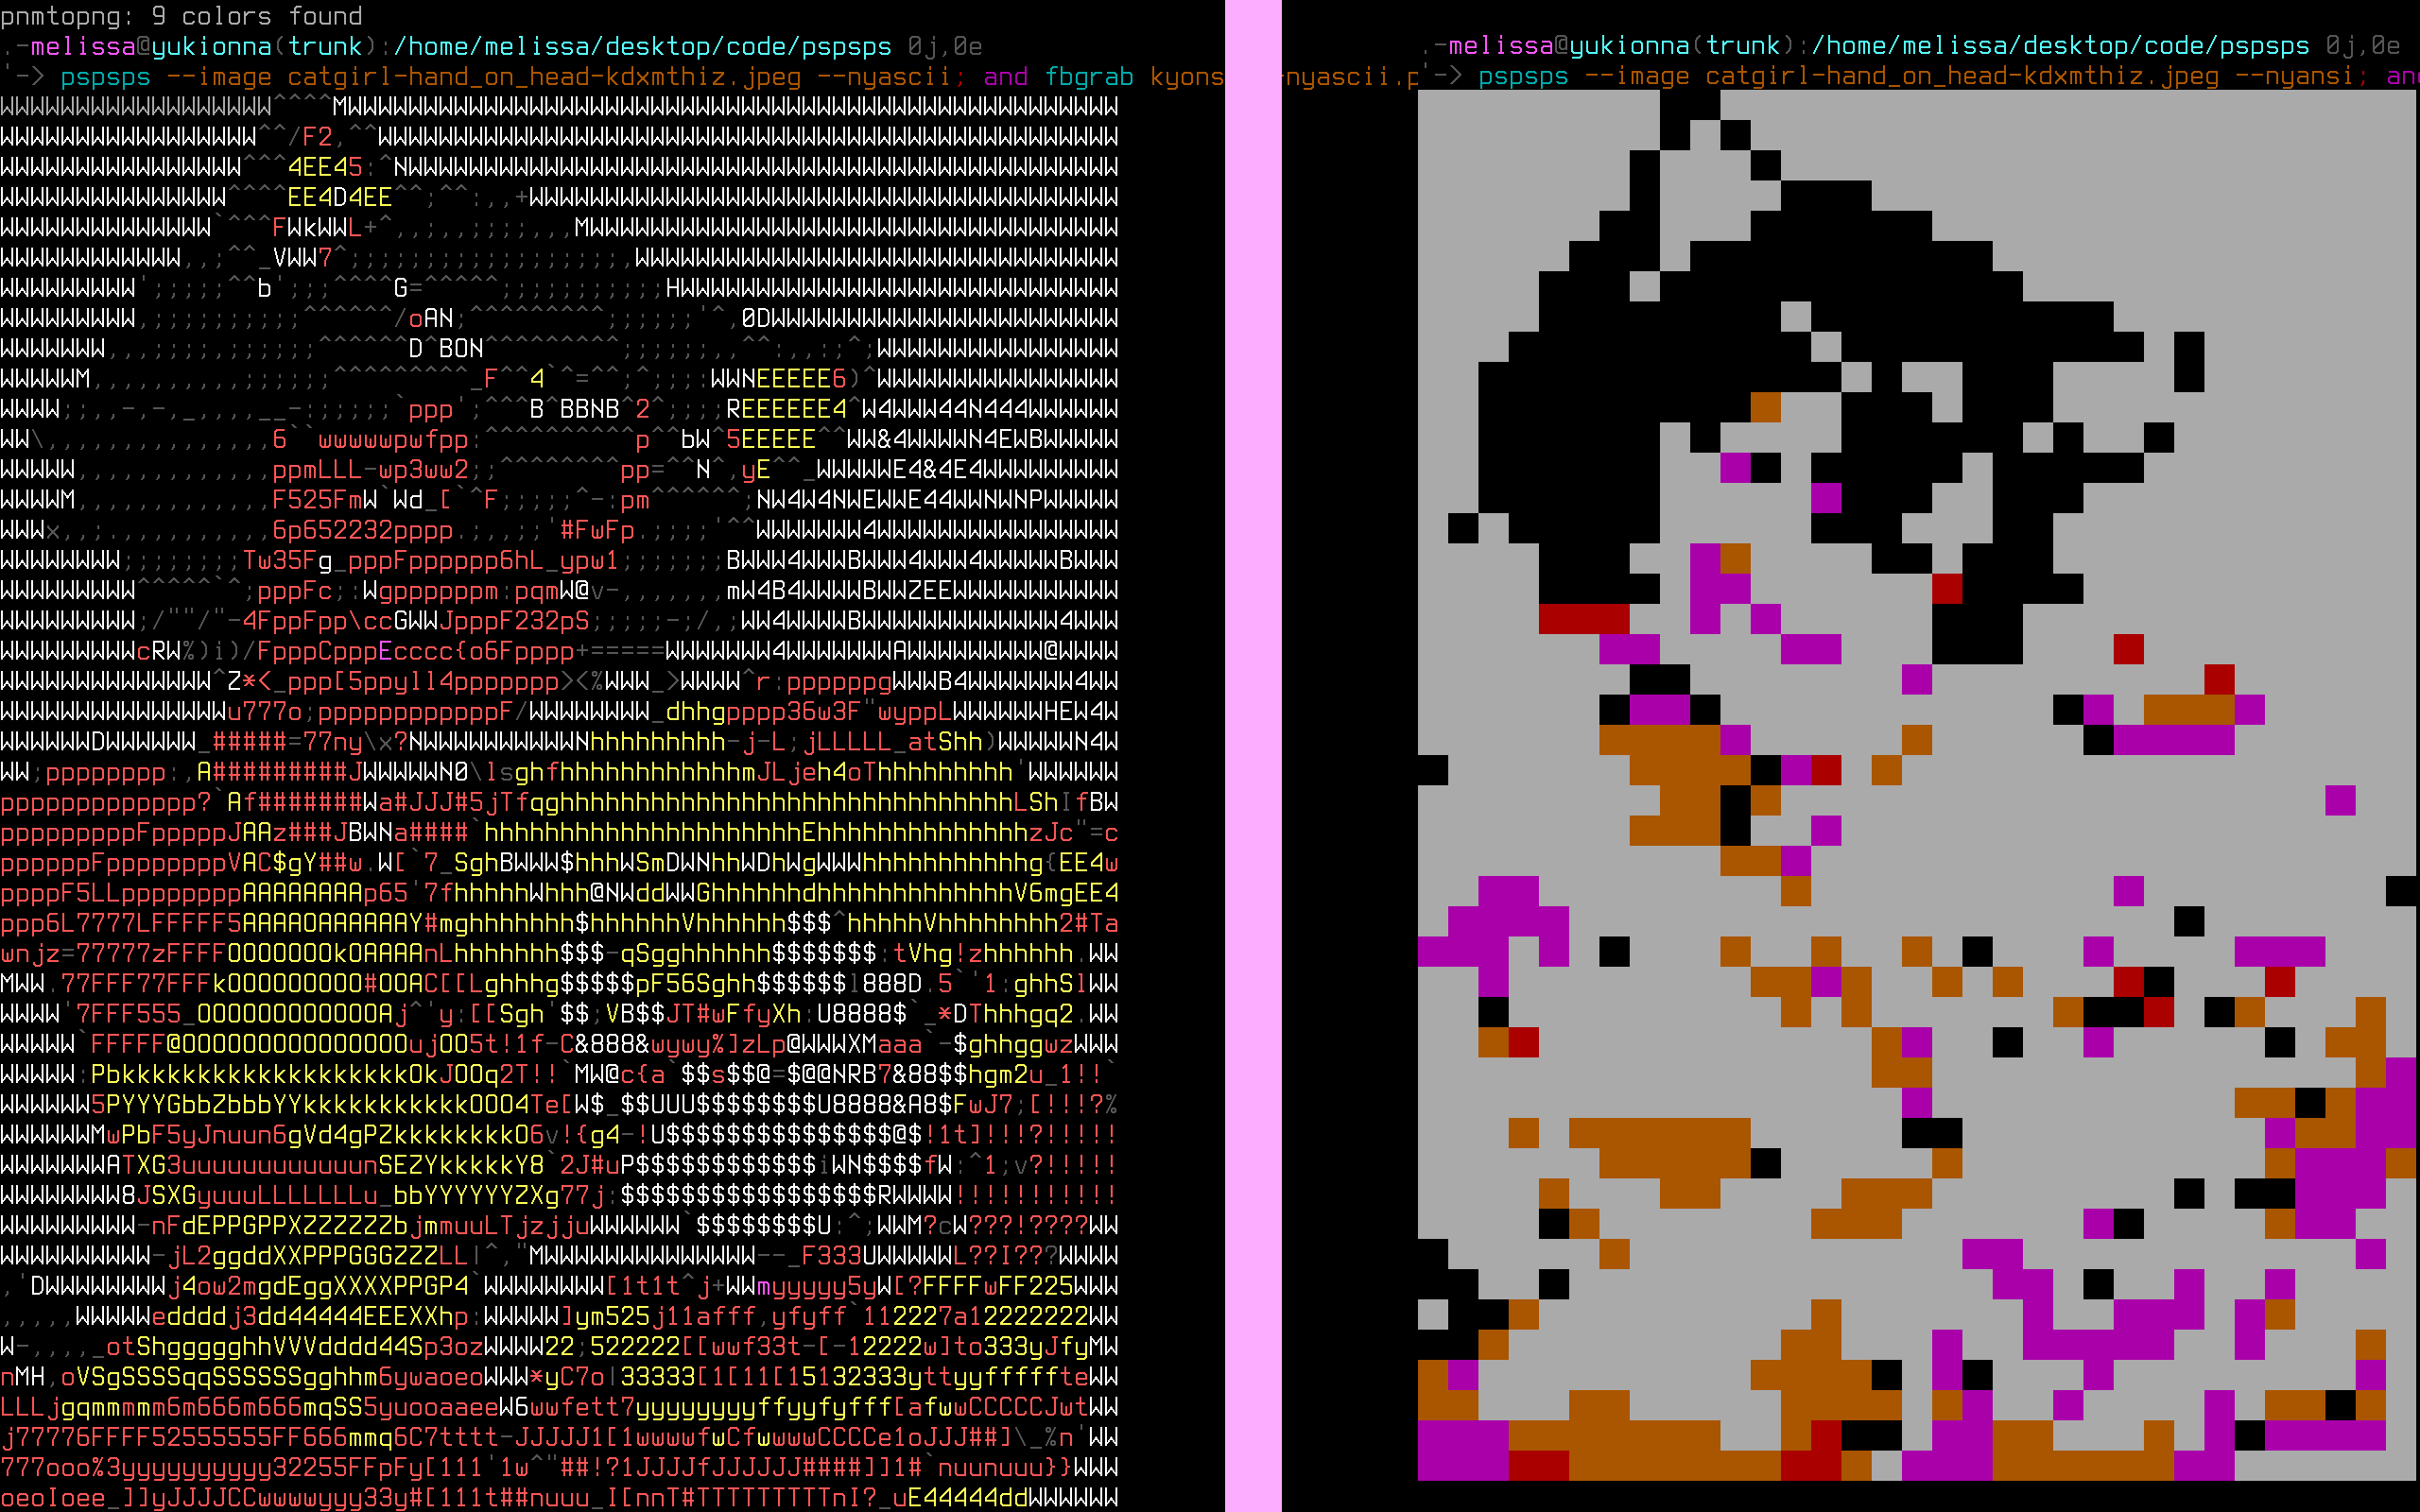 pspsps(1) is drawing catgirls in nyascii and nyansi, on the Linux console